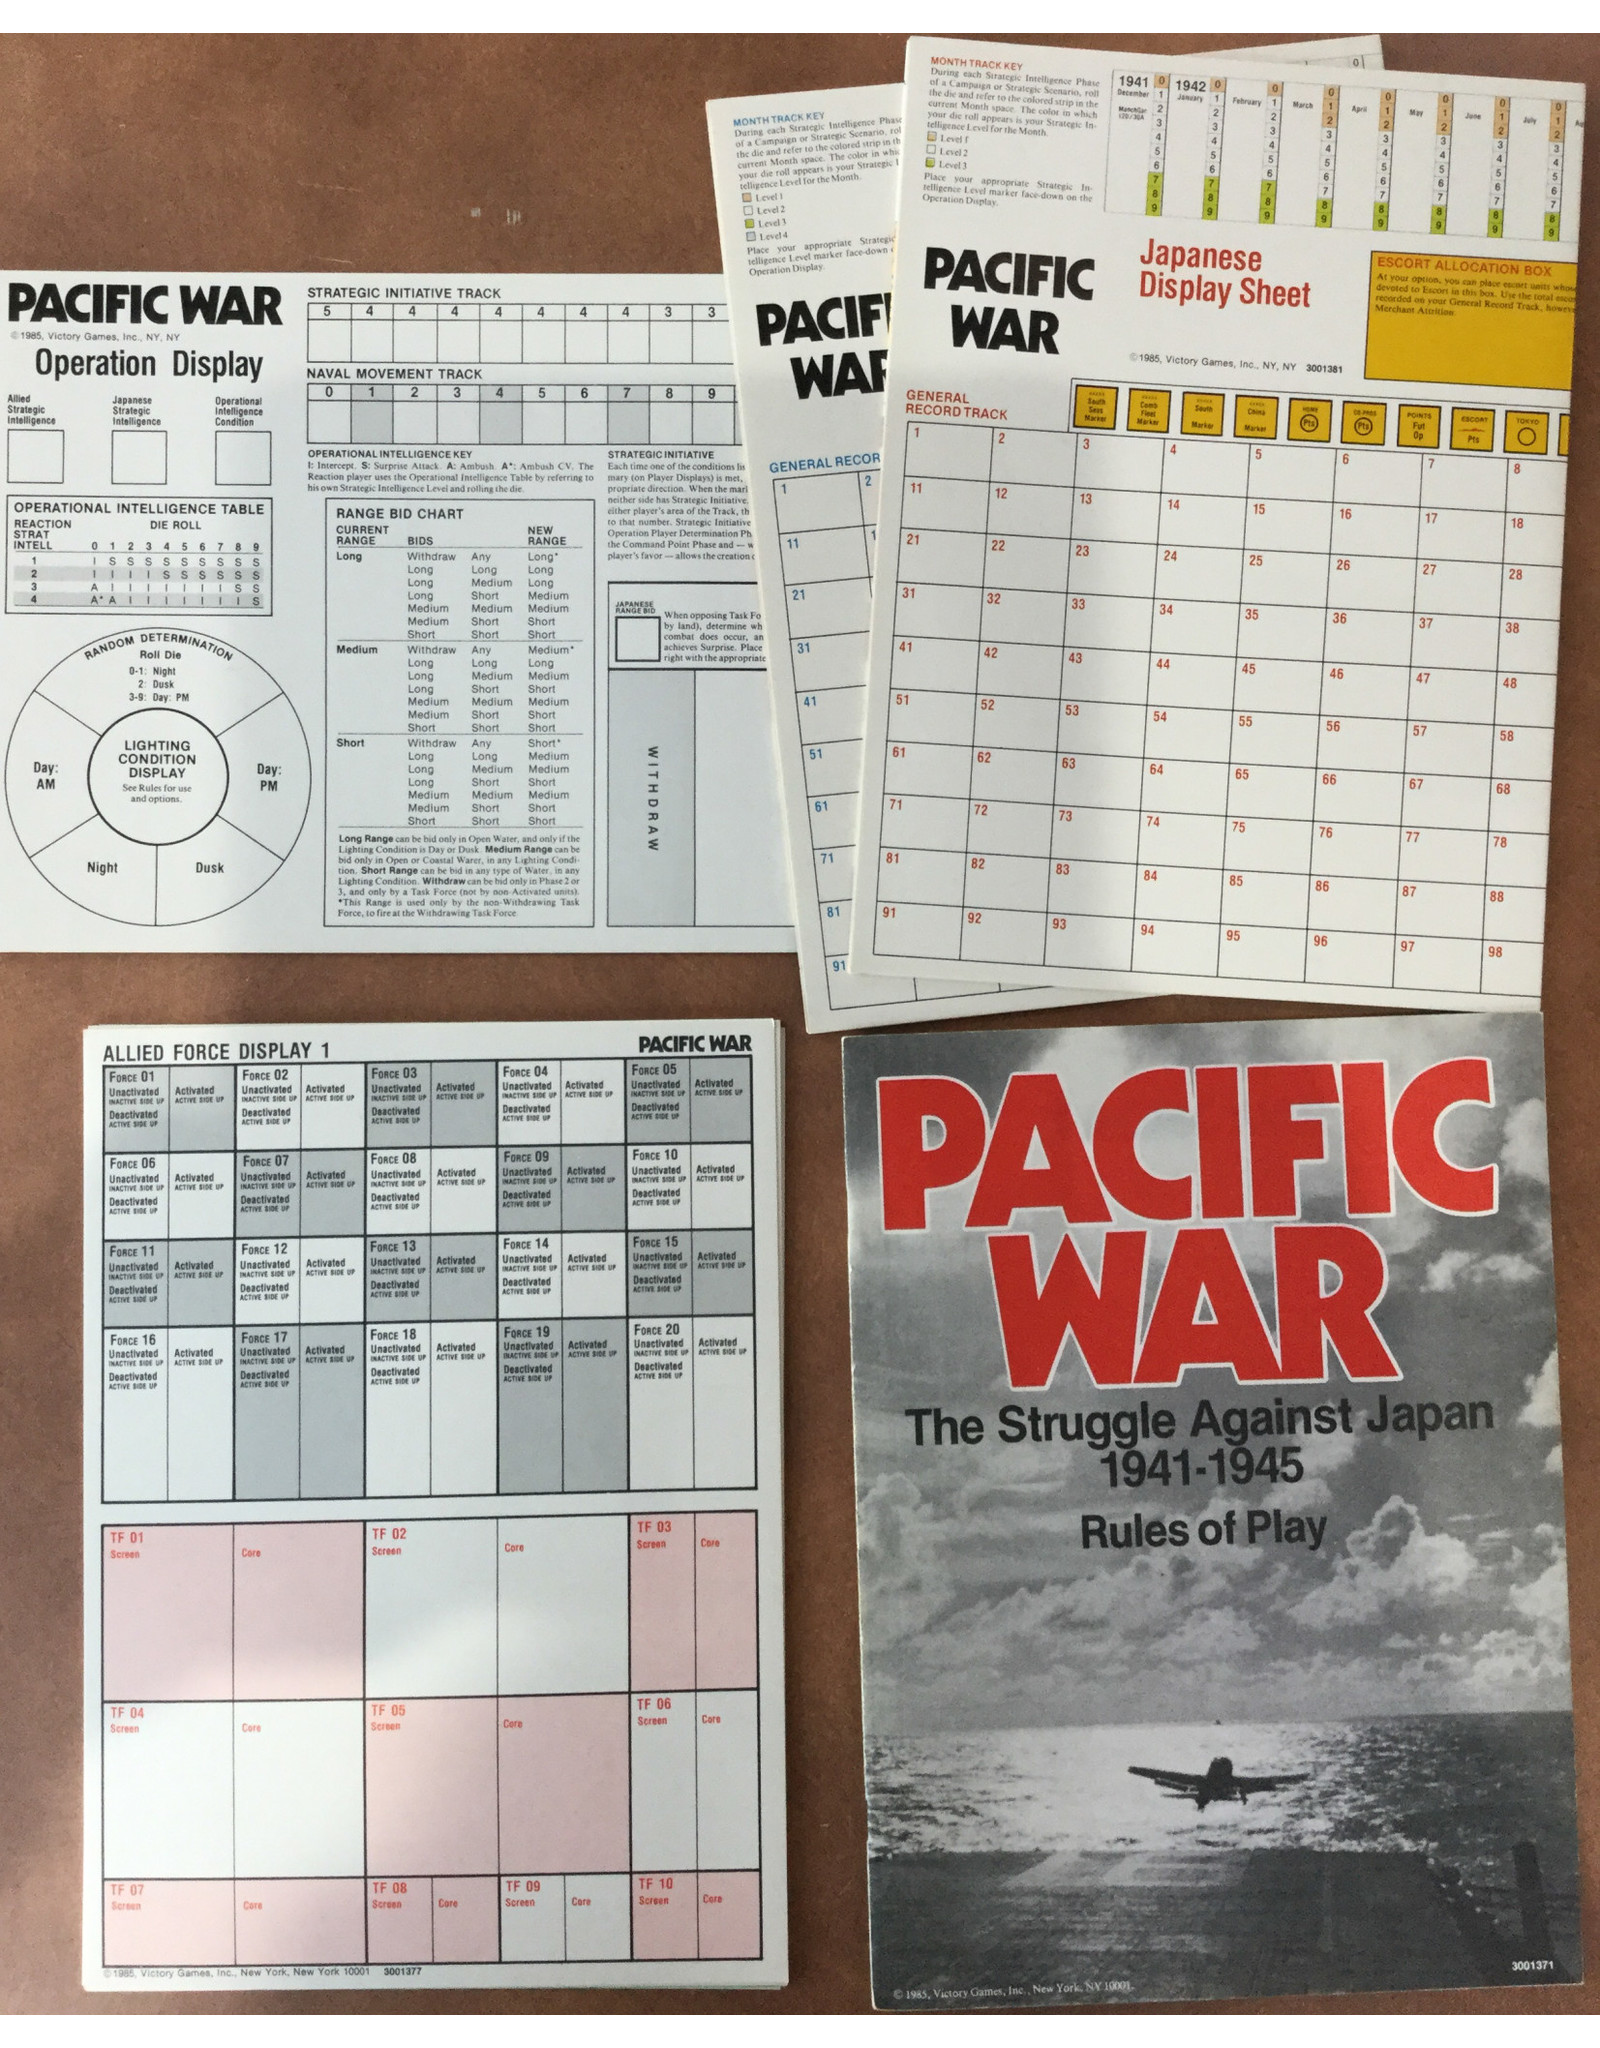 Victory Games Pacific War The Struggle Against Japan 1941-1945 (1985)